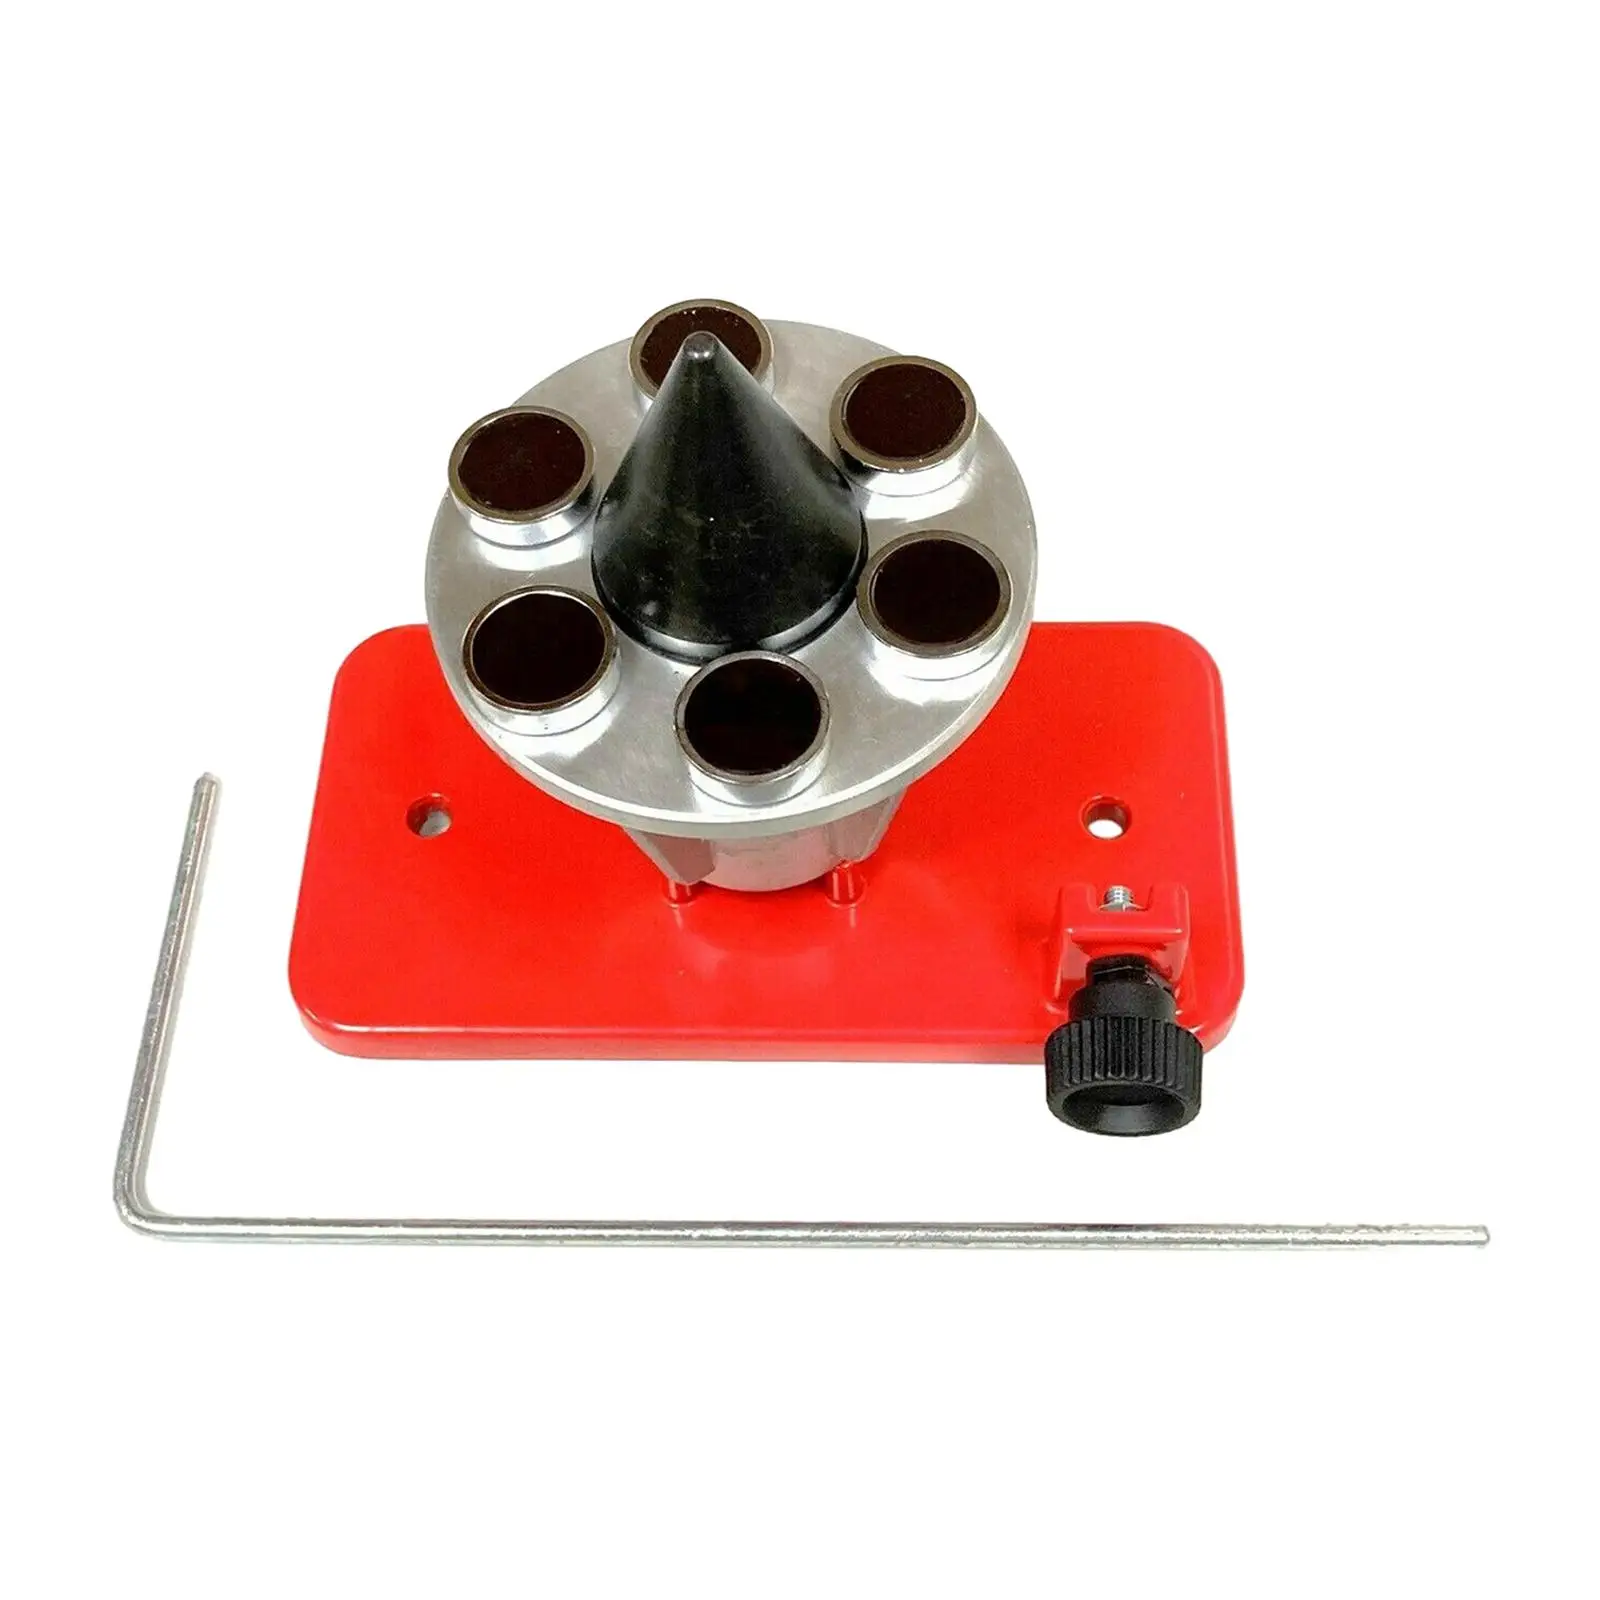 Replace 42-047 05800000 Universal Alloy Balance Tool Red Mower Blade Balancer Precision Blade Balancer for All Lawnmower Blade